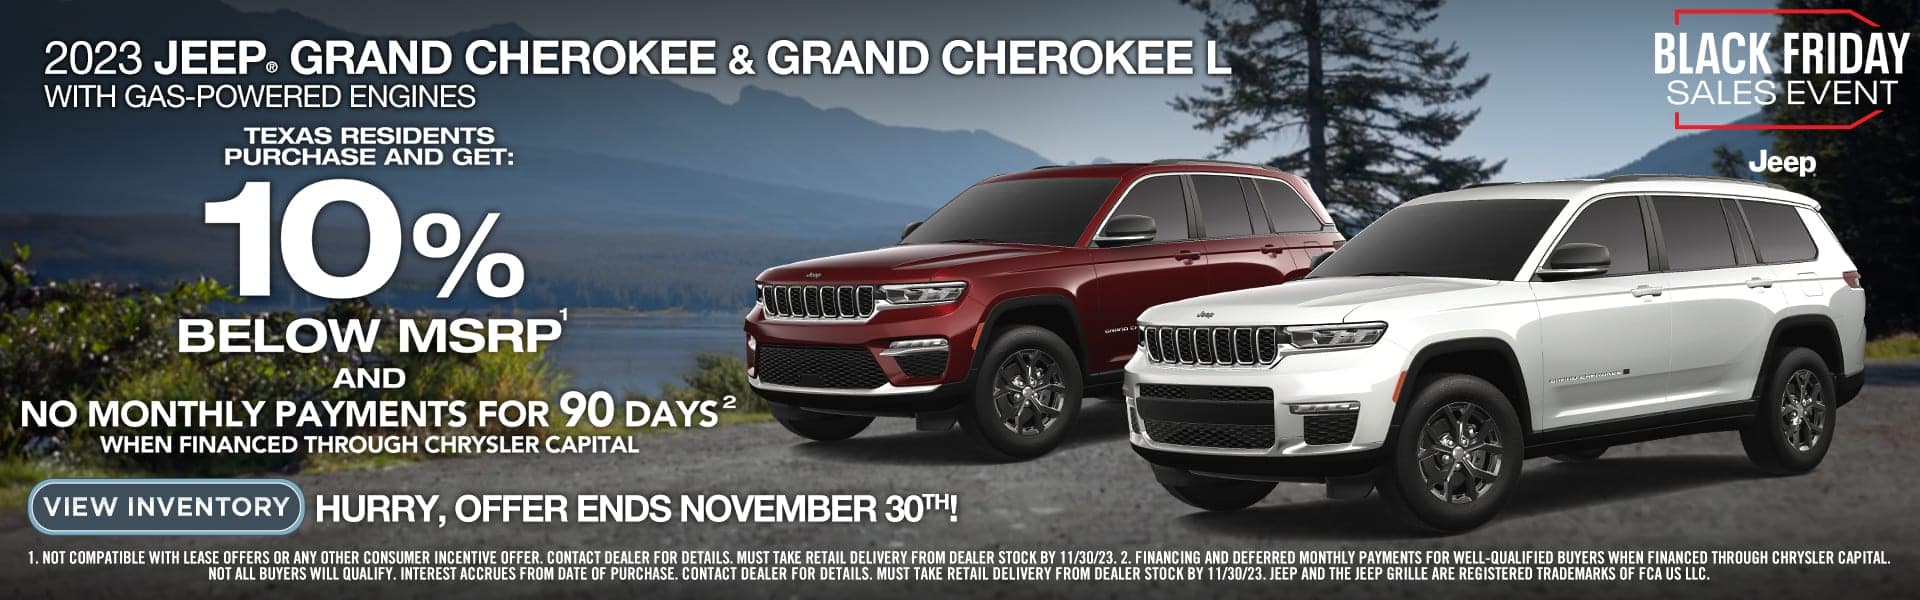 Jeep Grand Cherokee offer